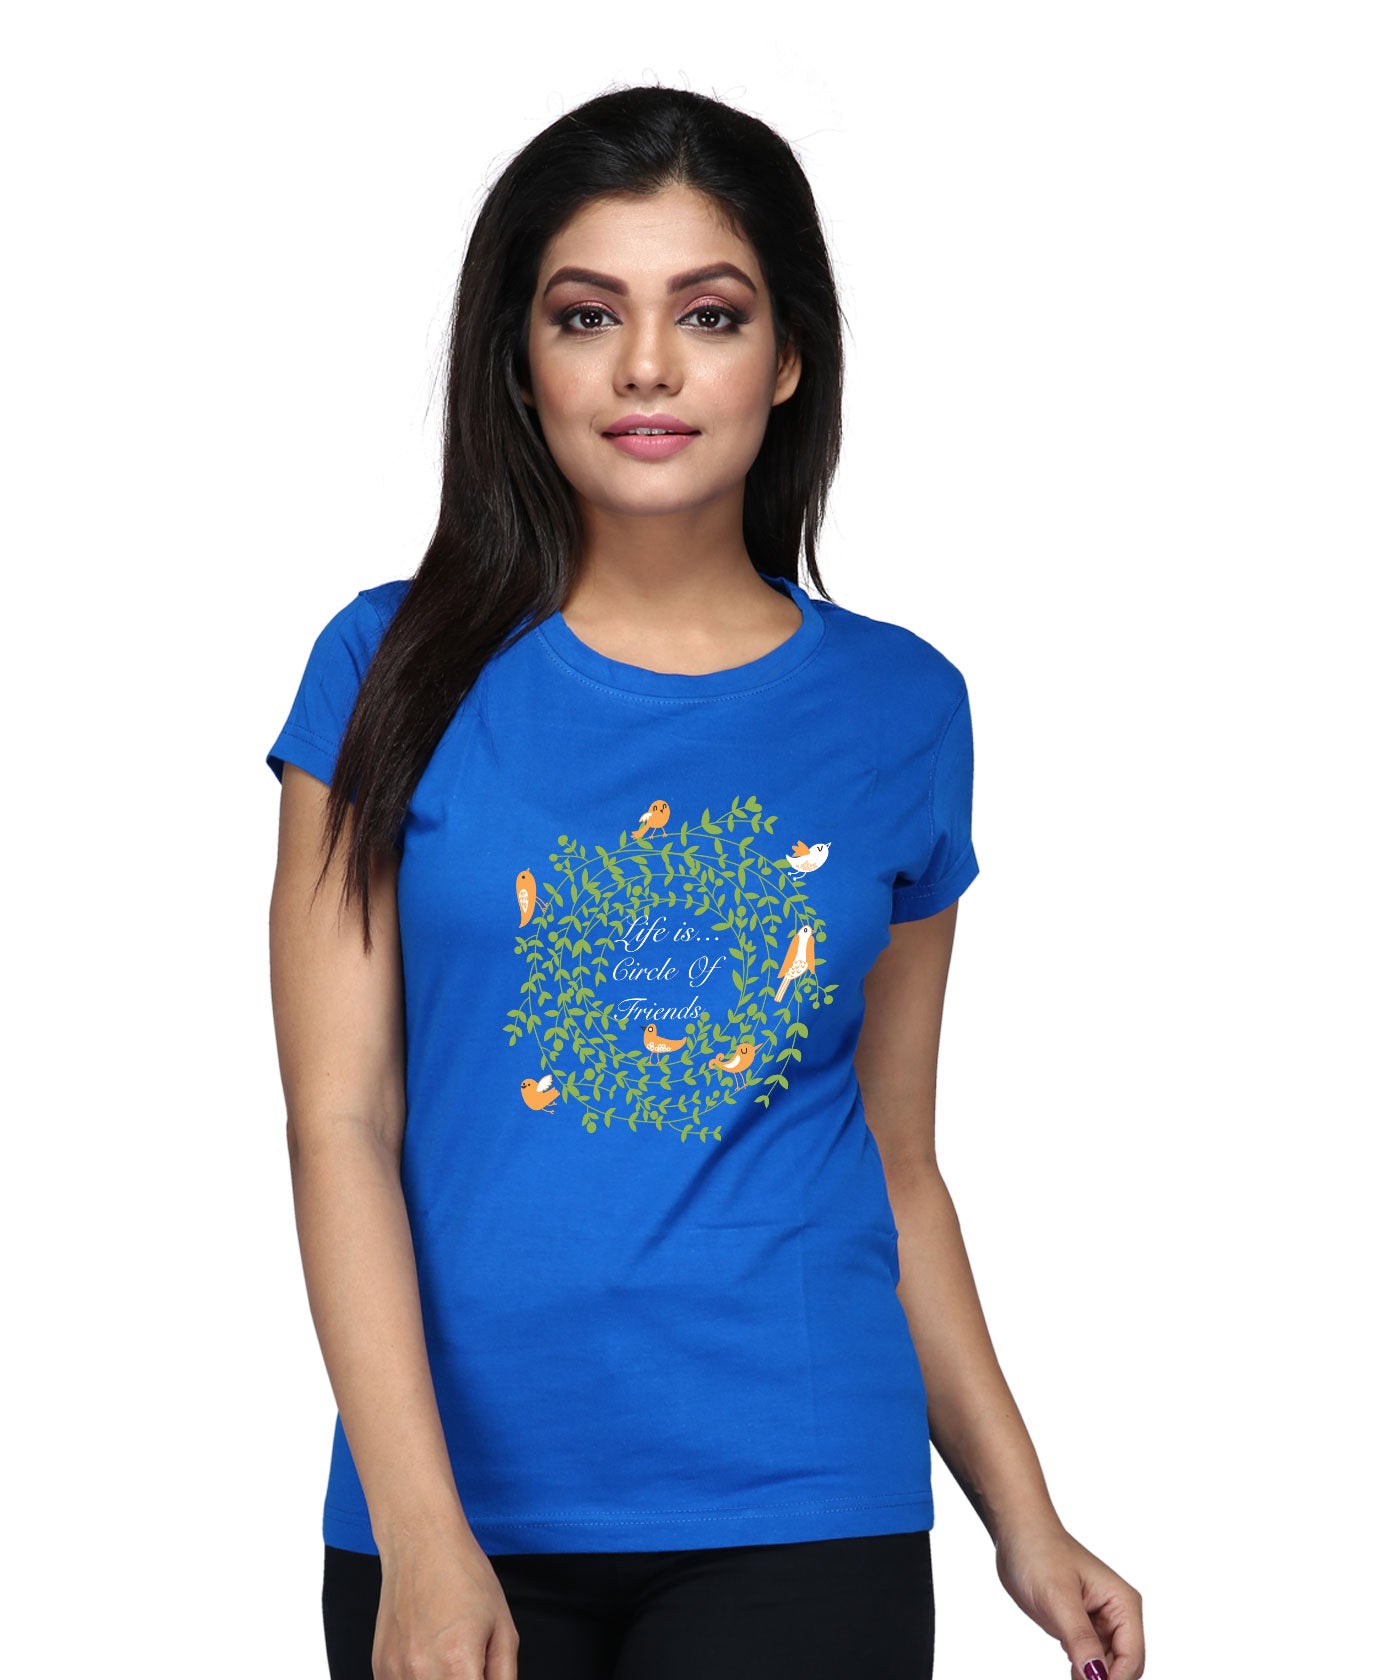 Life is Circle of Friend - Premium Round Neck Cotton Tees for Women - Cactus Green And Electric Blue